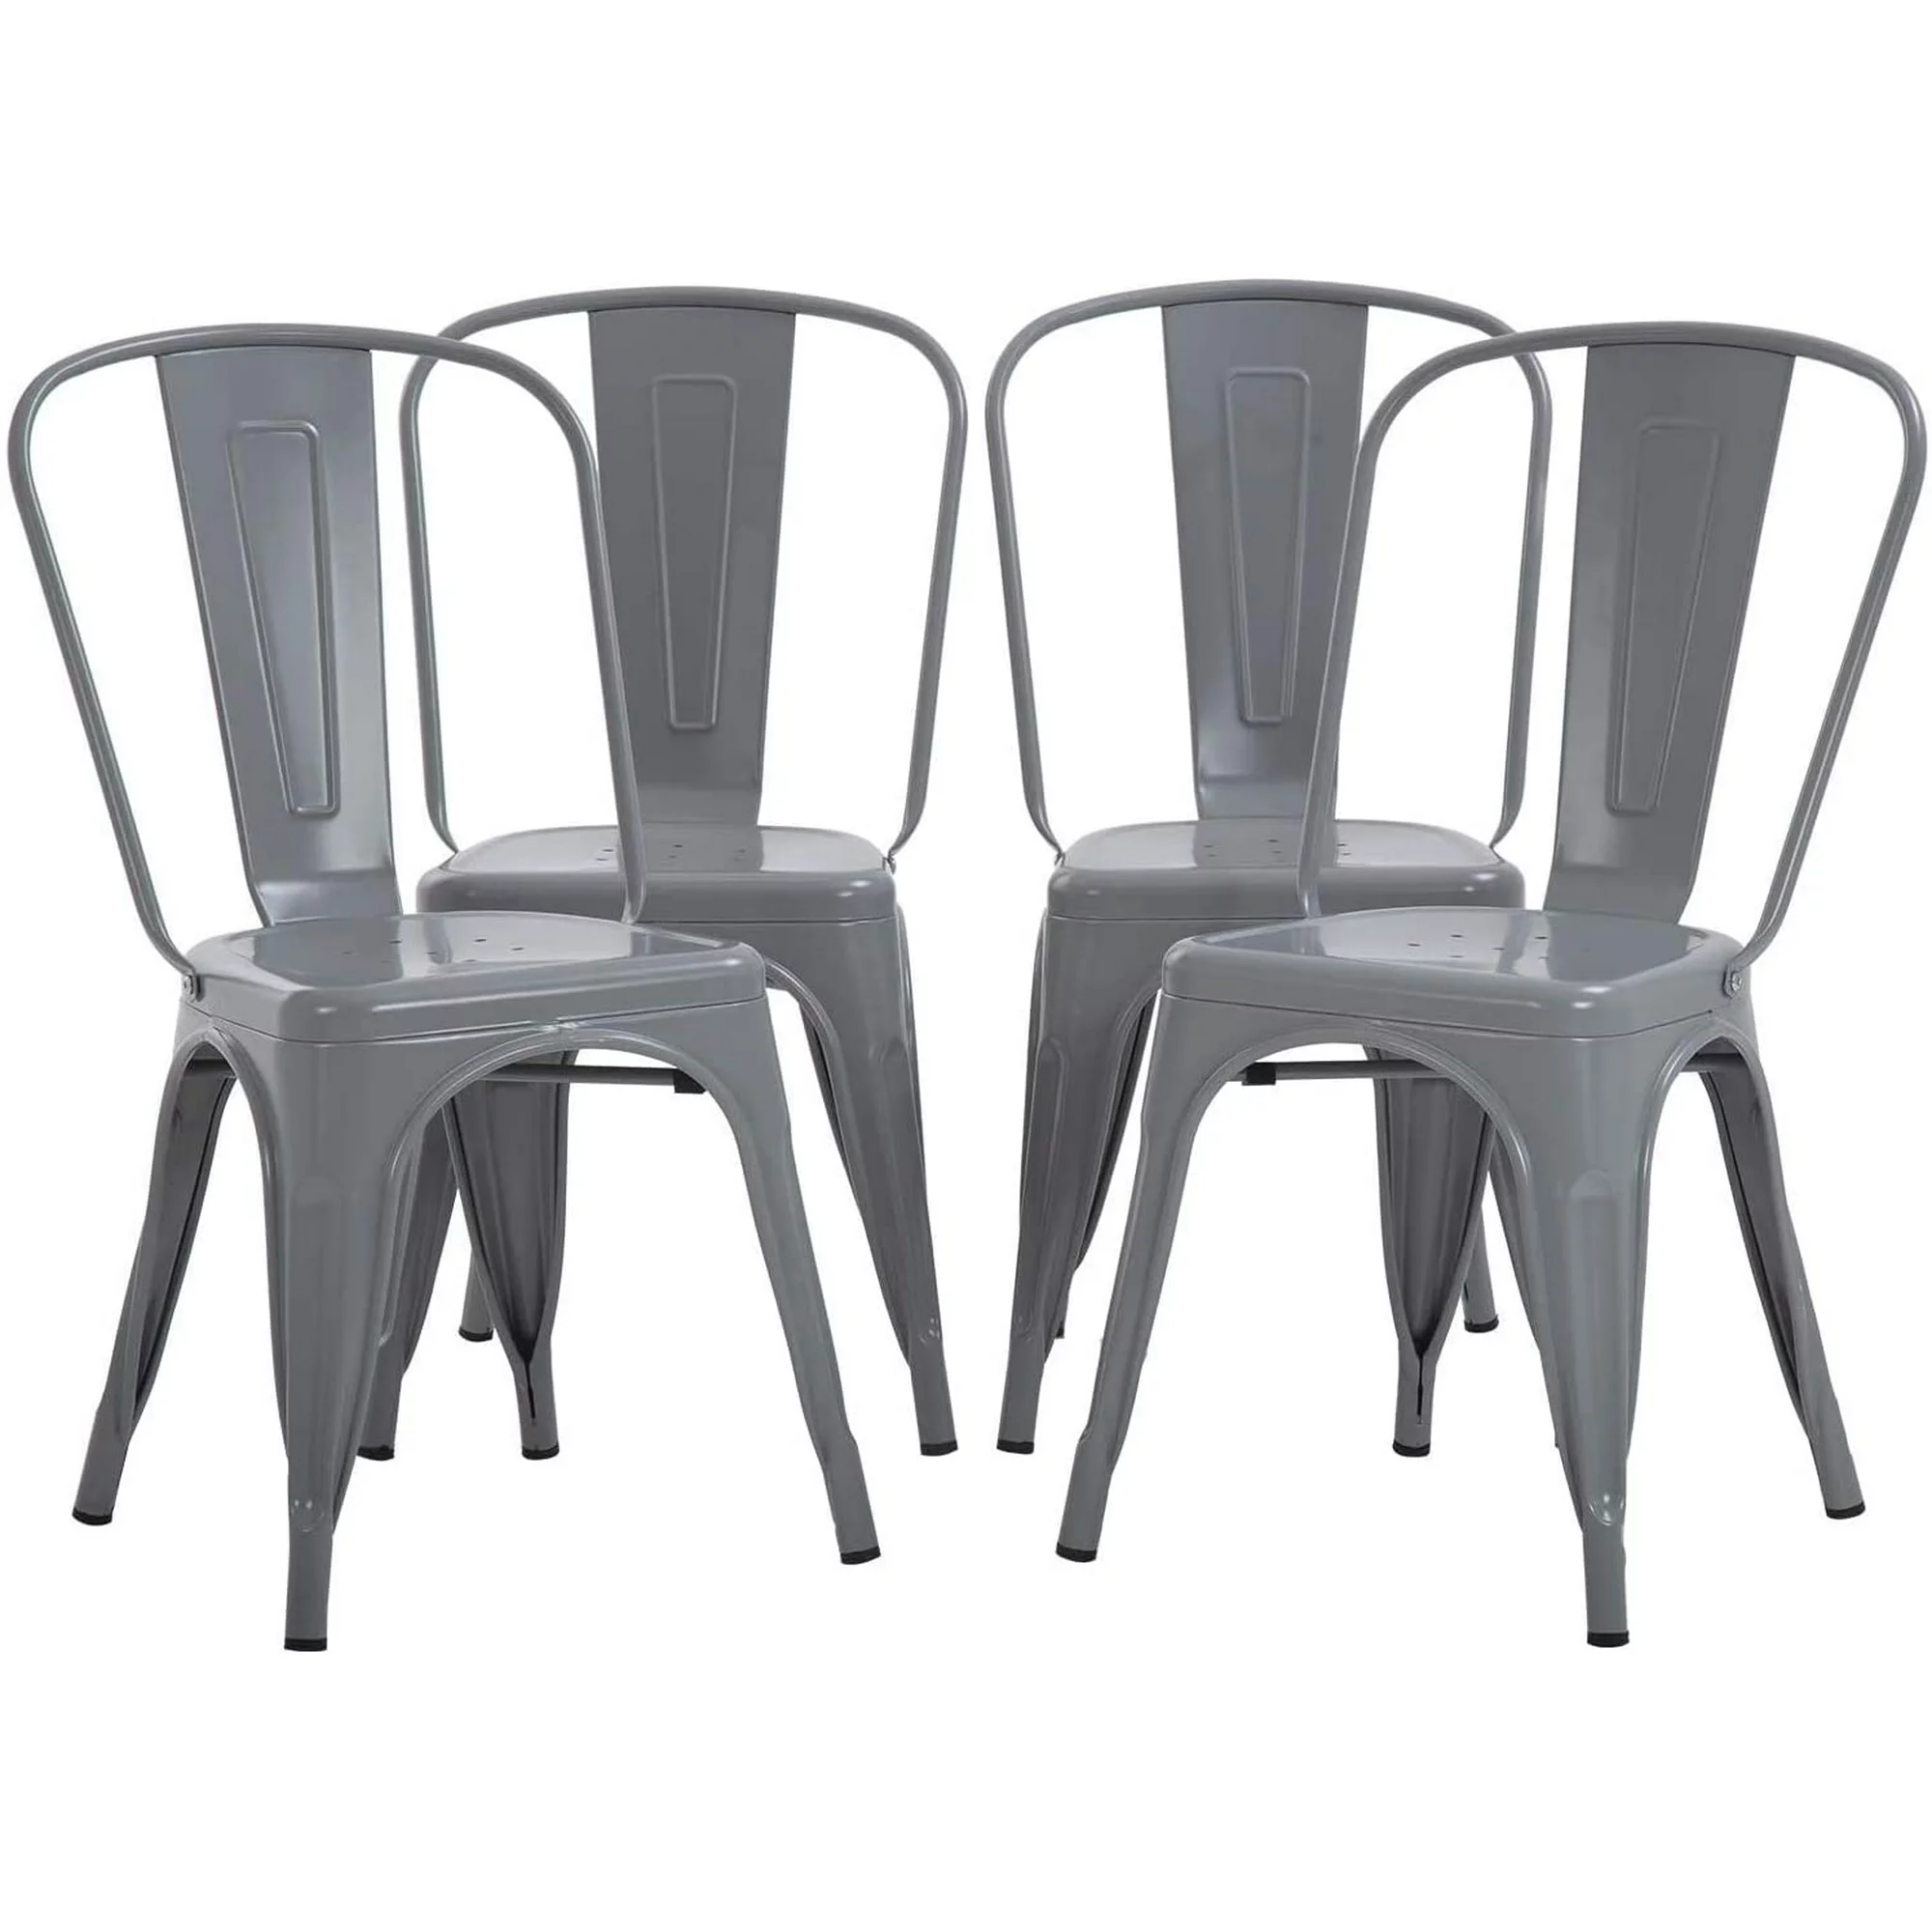 COMHOMA Metal Dining Chair Indoor Outdoor Chairs Patio Chairs-WMT-H0042-lxy